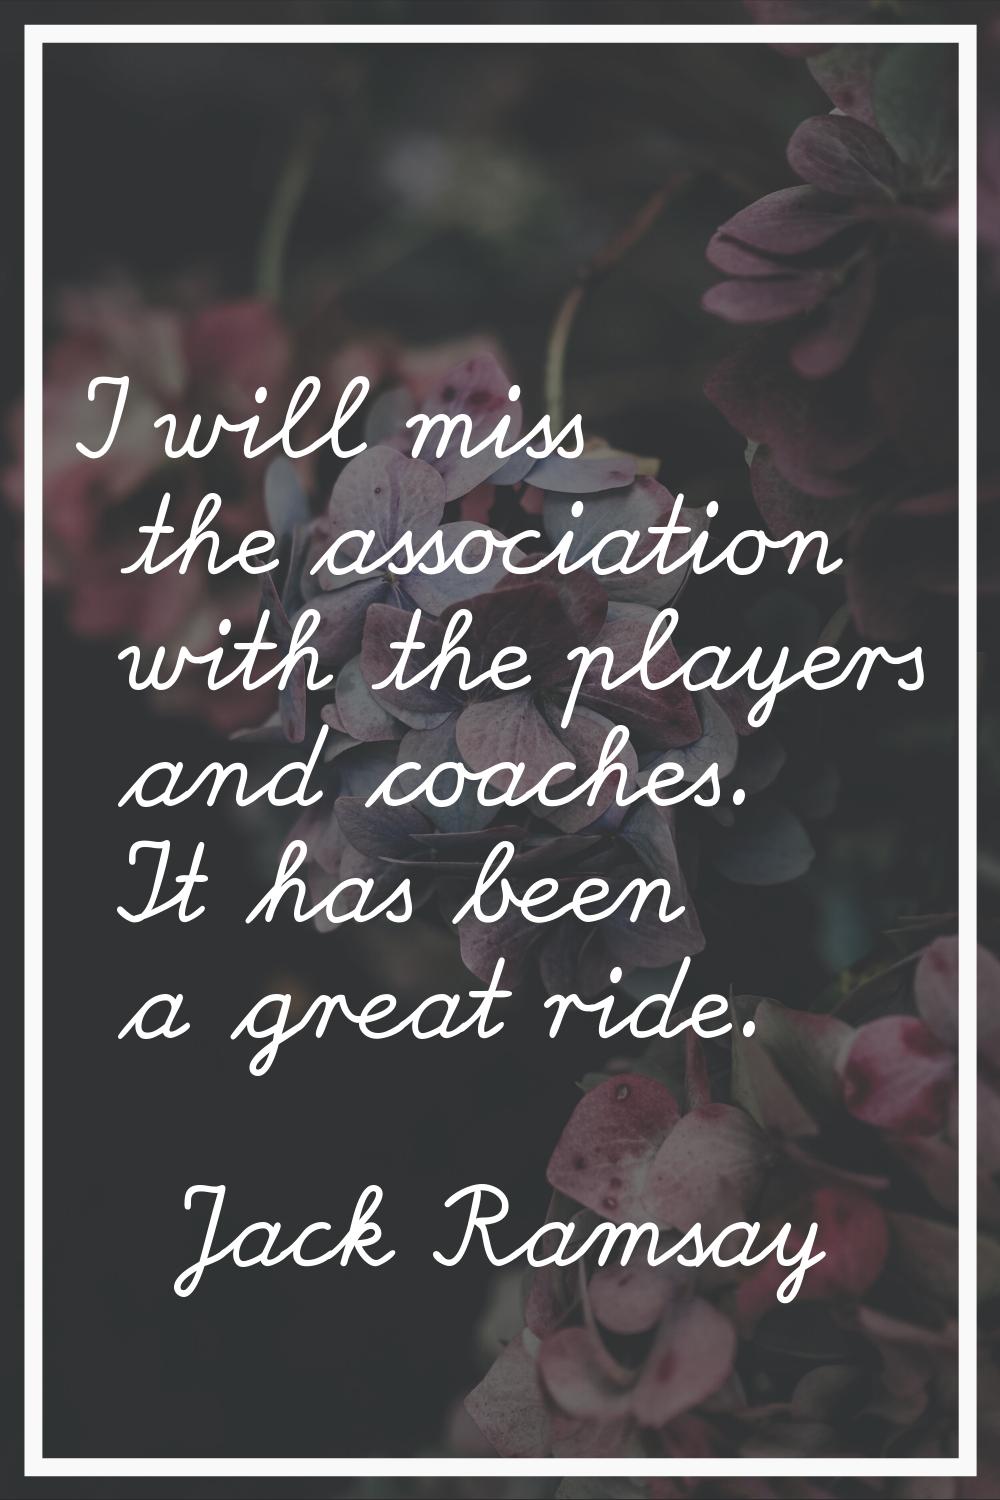 I will miss the association with the players and coaches. It has been a great ride.